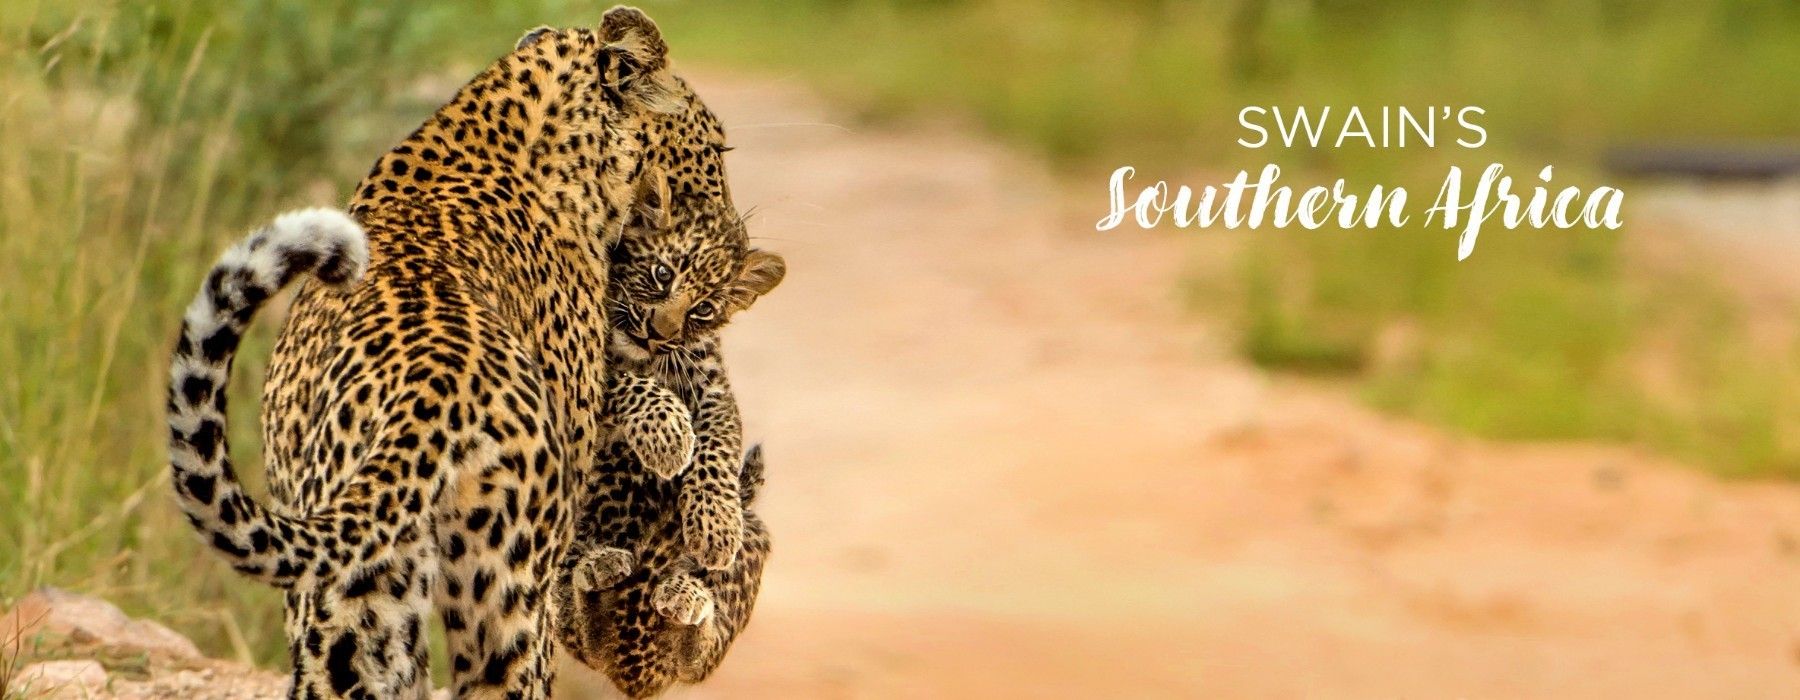 Explore Southern Africa